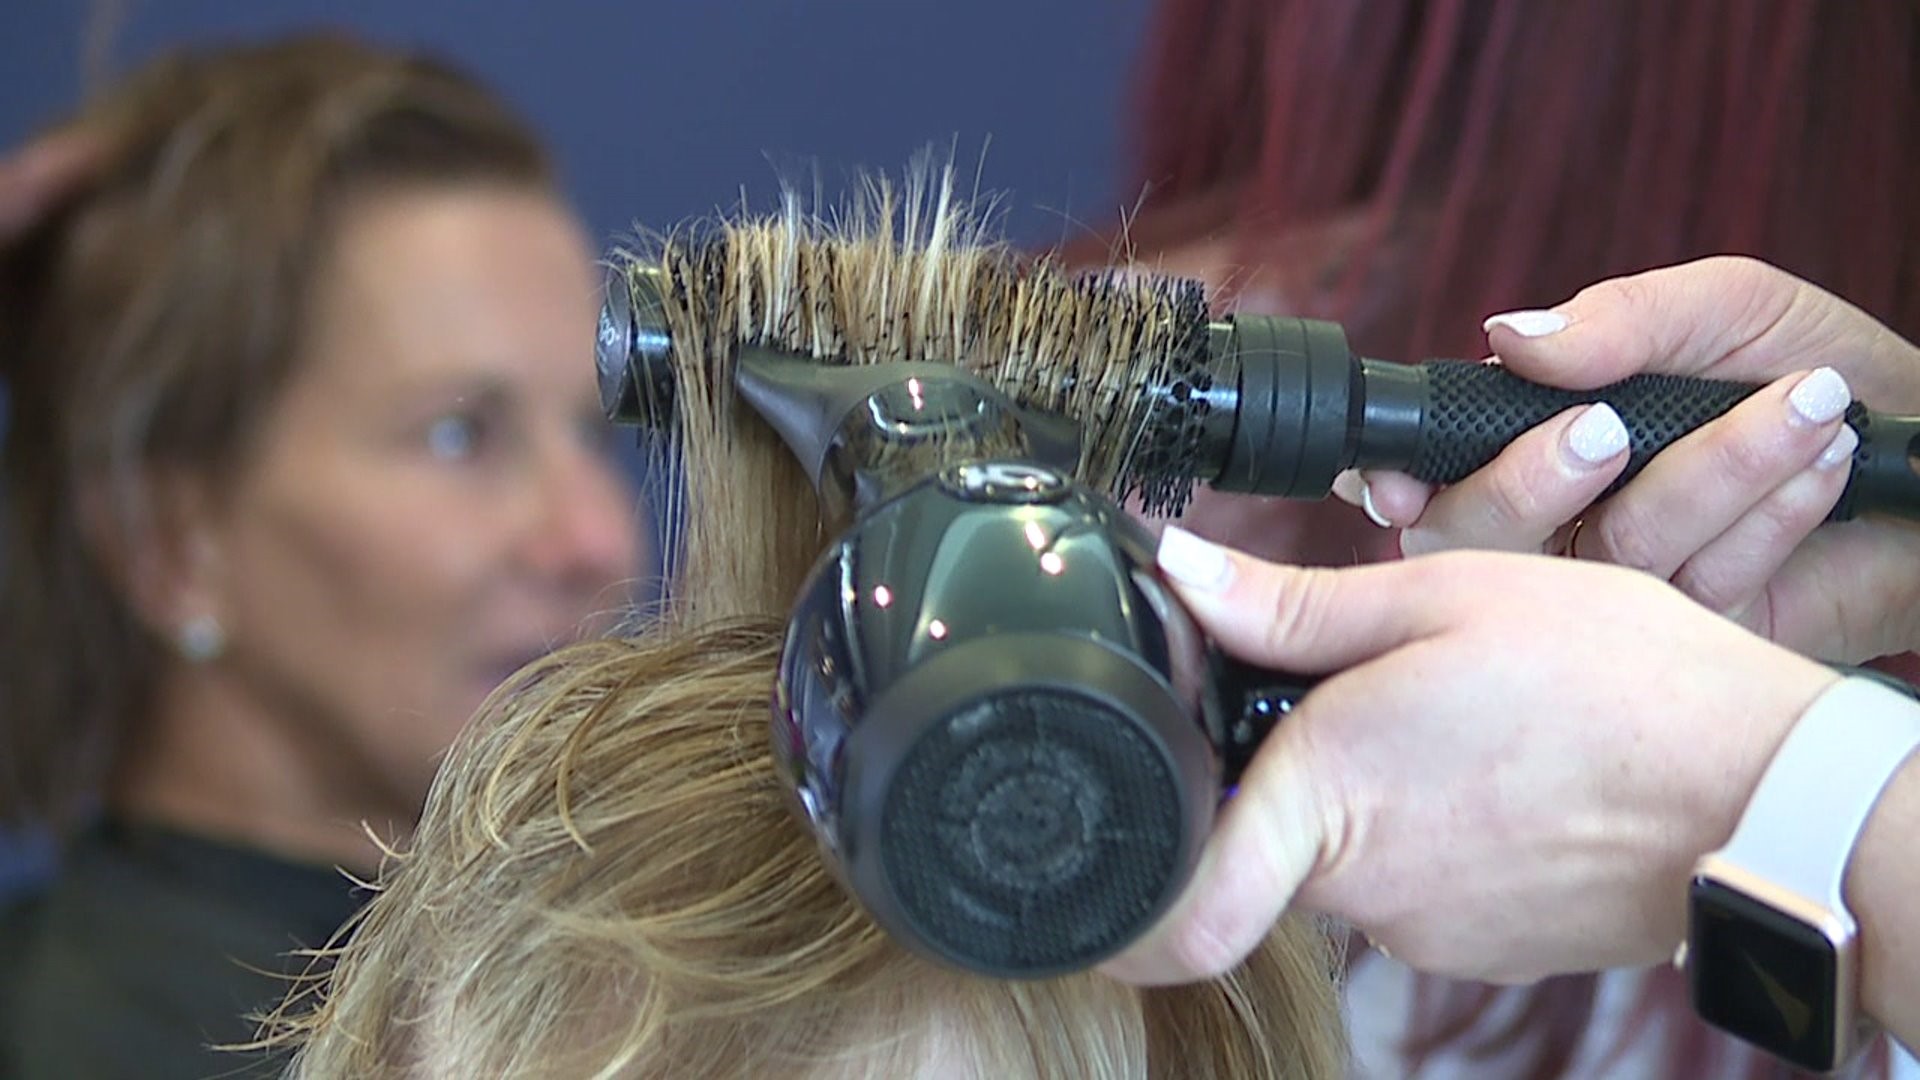 Iowa hairstylists look for signs of domestic abuse